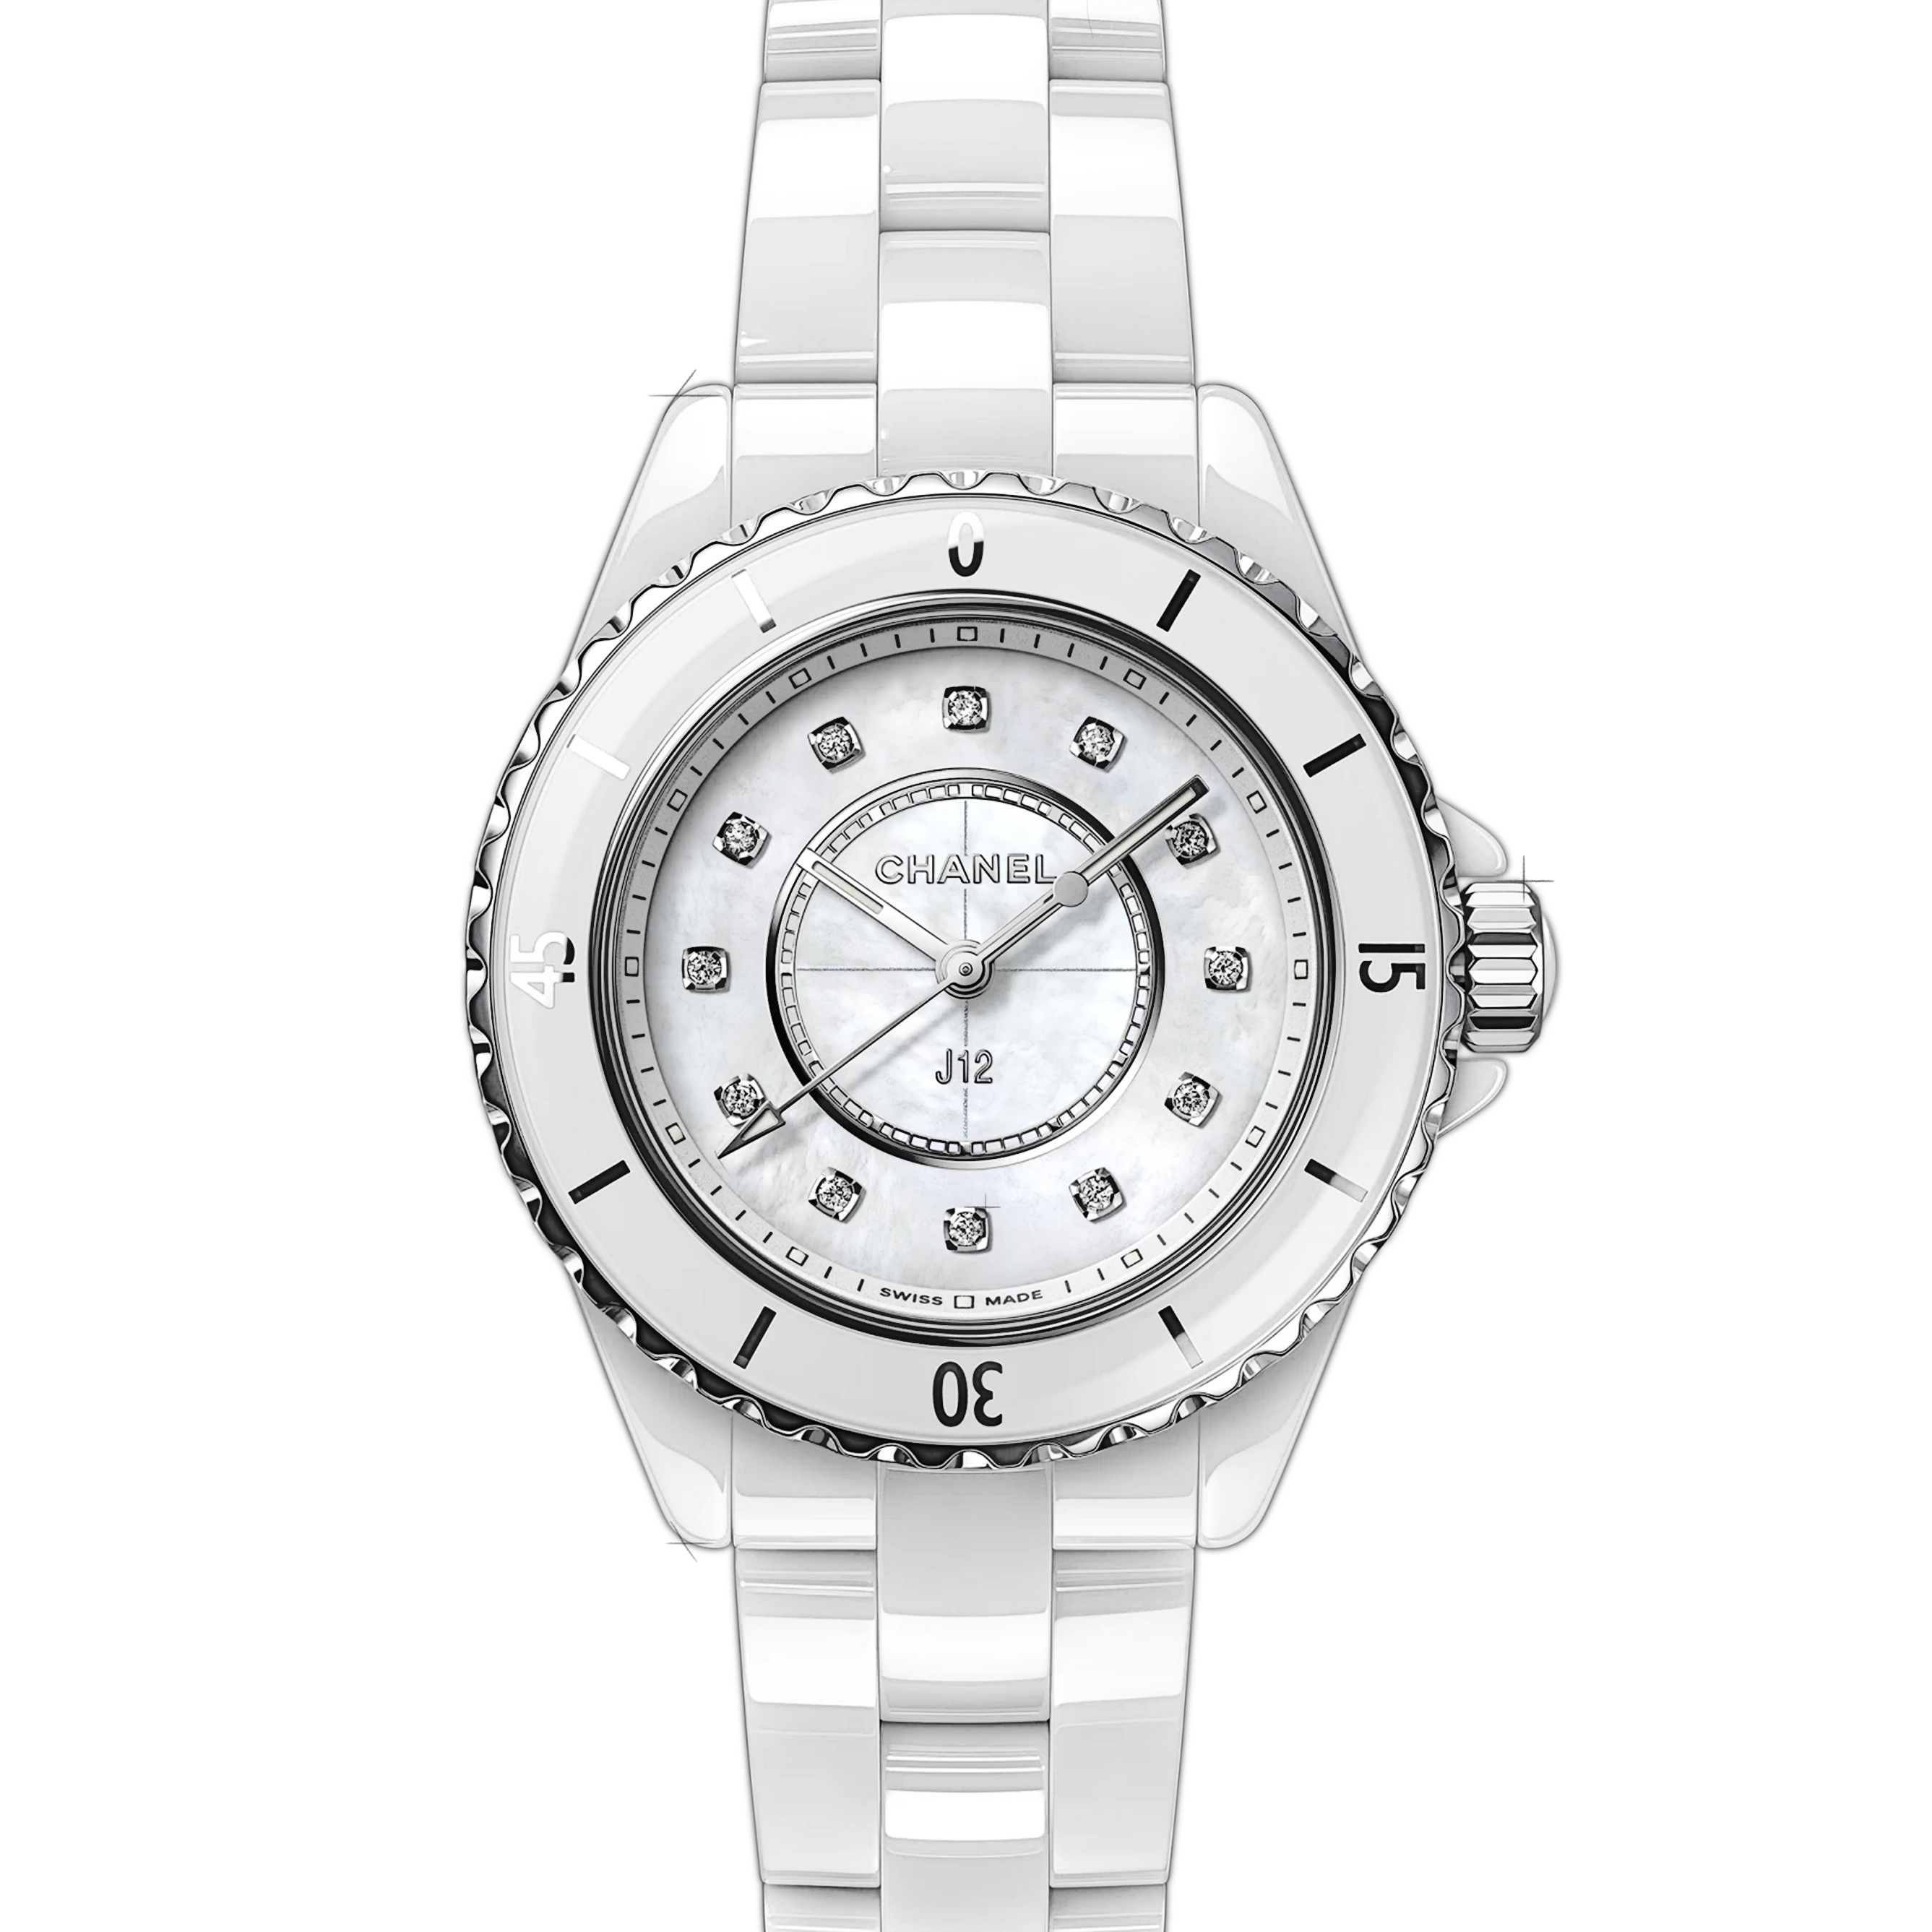 Chanel Watches in Uganda for sale  Prices on Jijiug